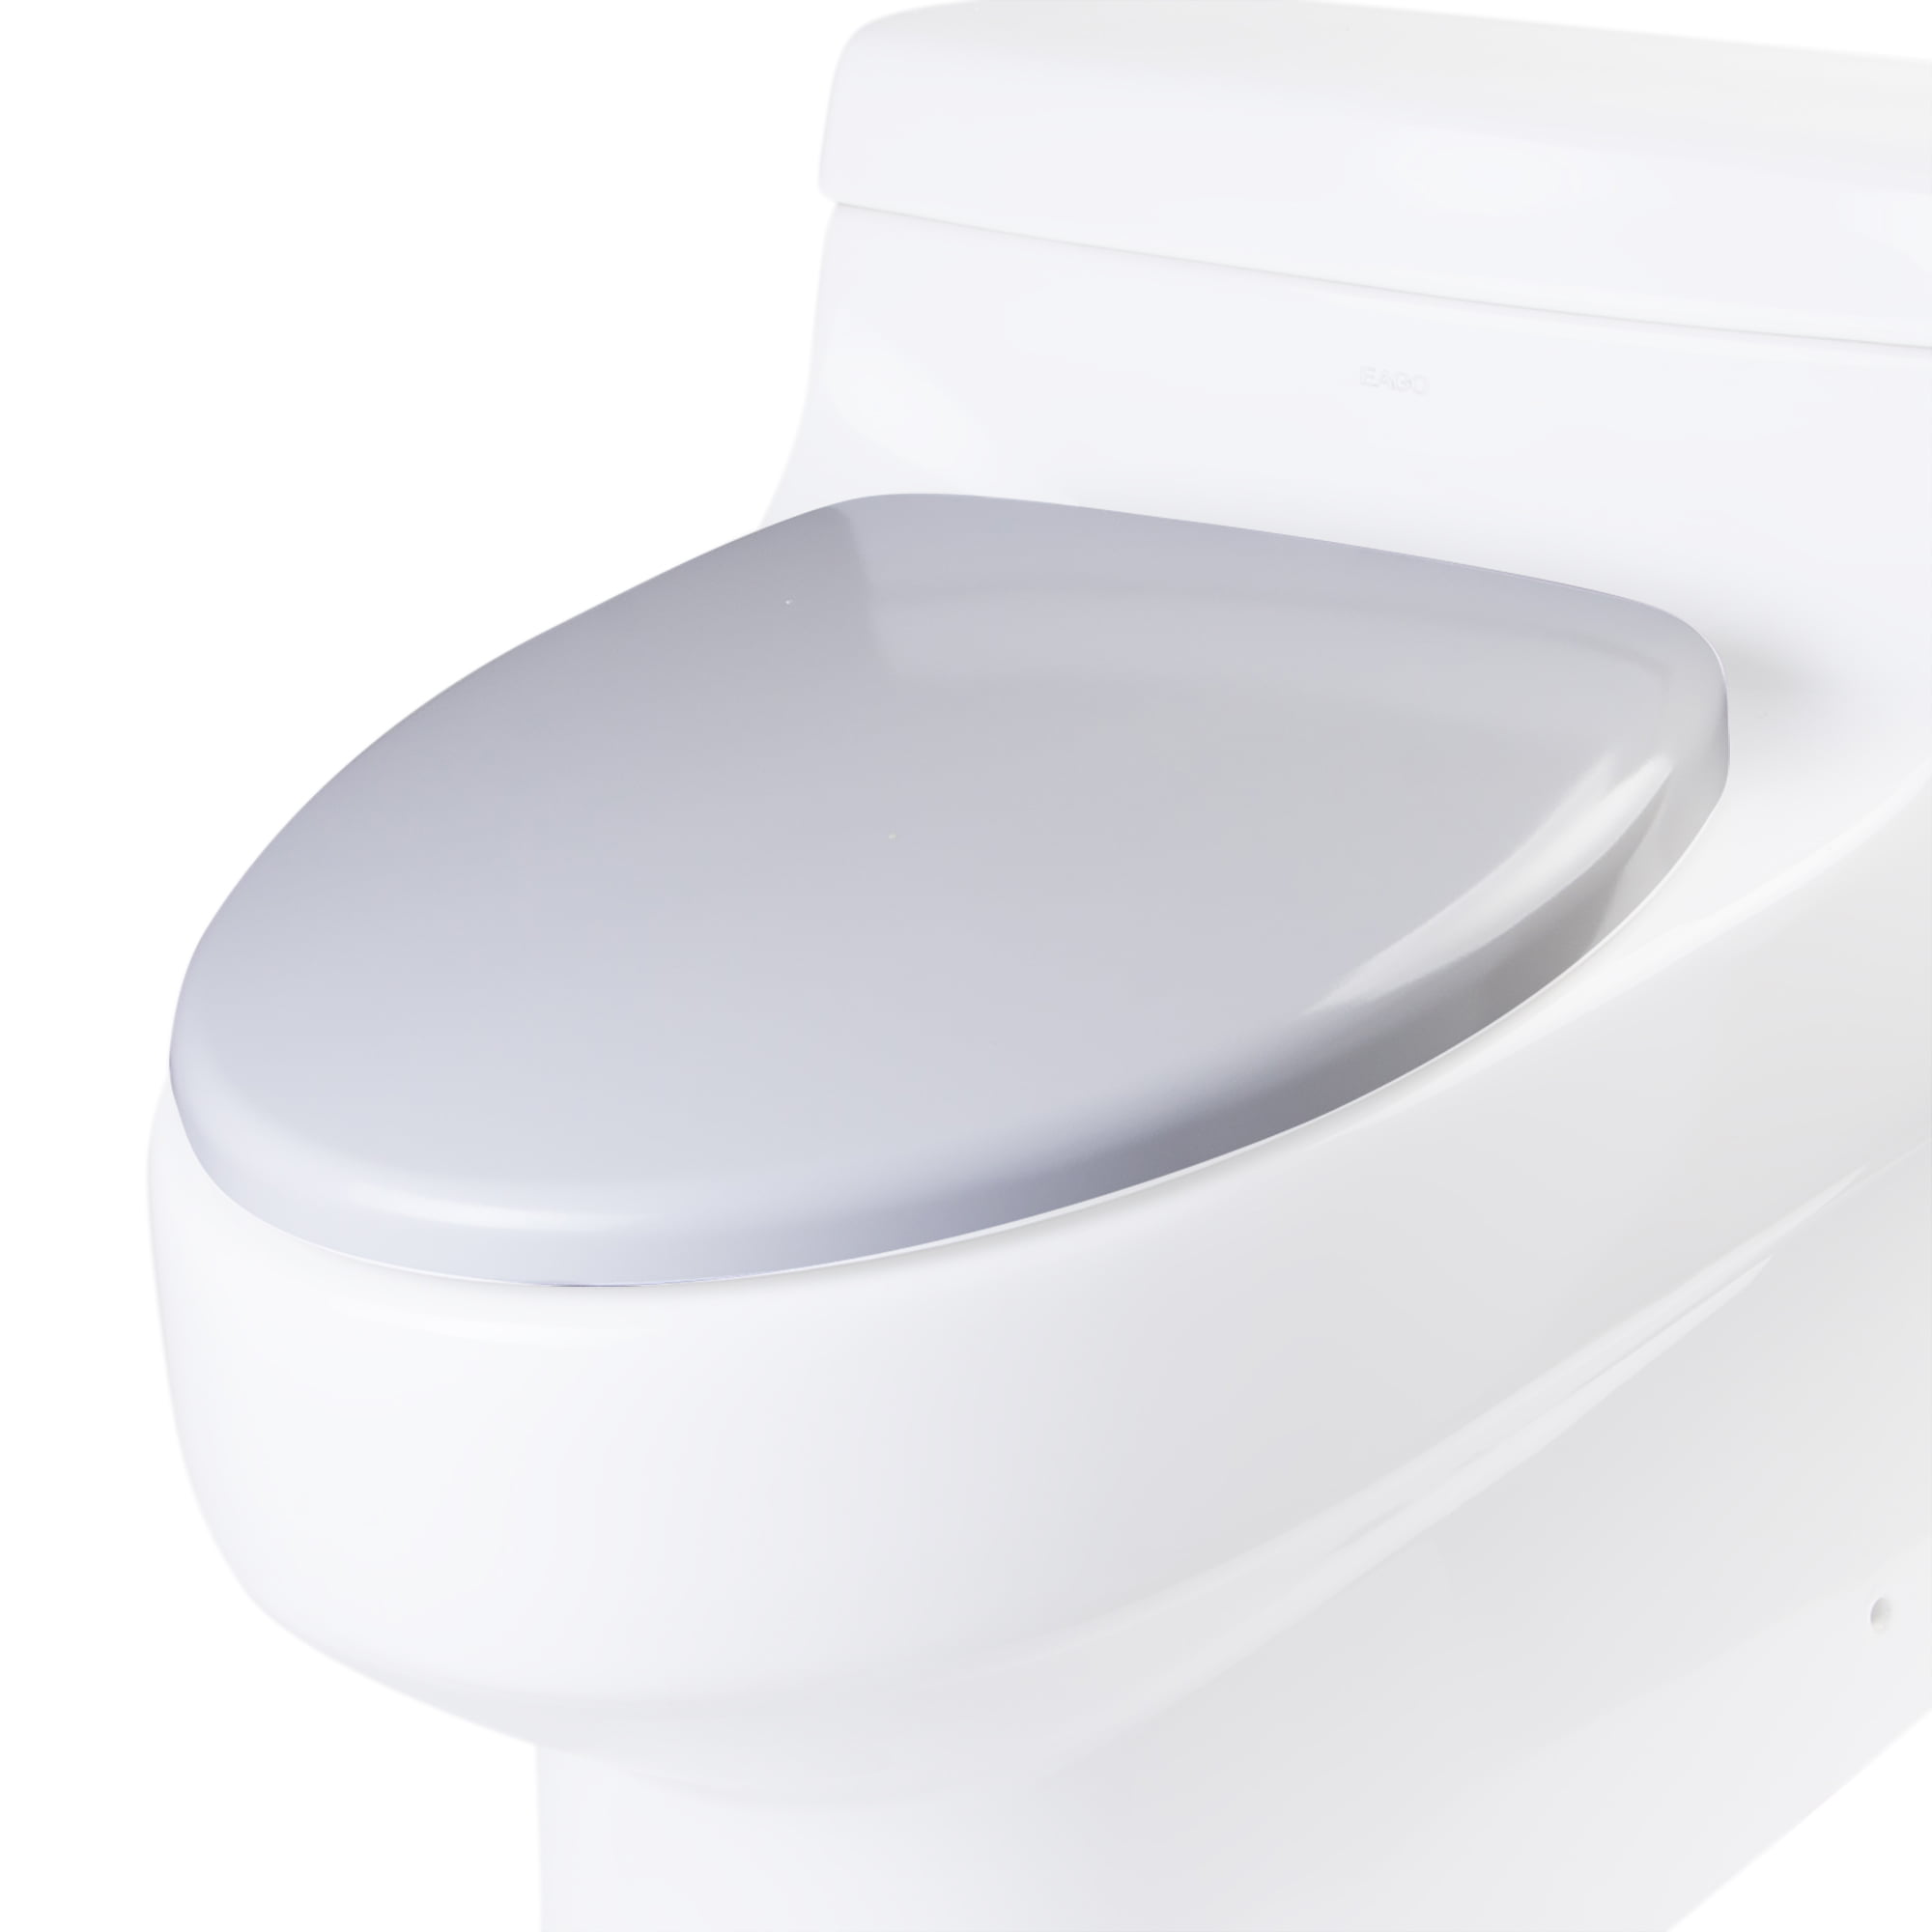 R-352seat Replacement Soft Closing Plastic Toilet Seat, White For Tb352